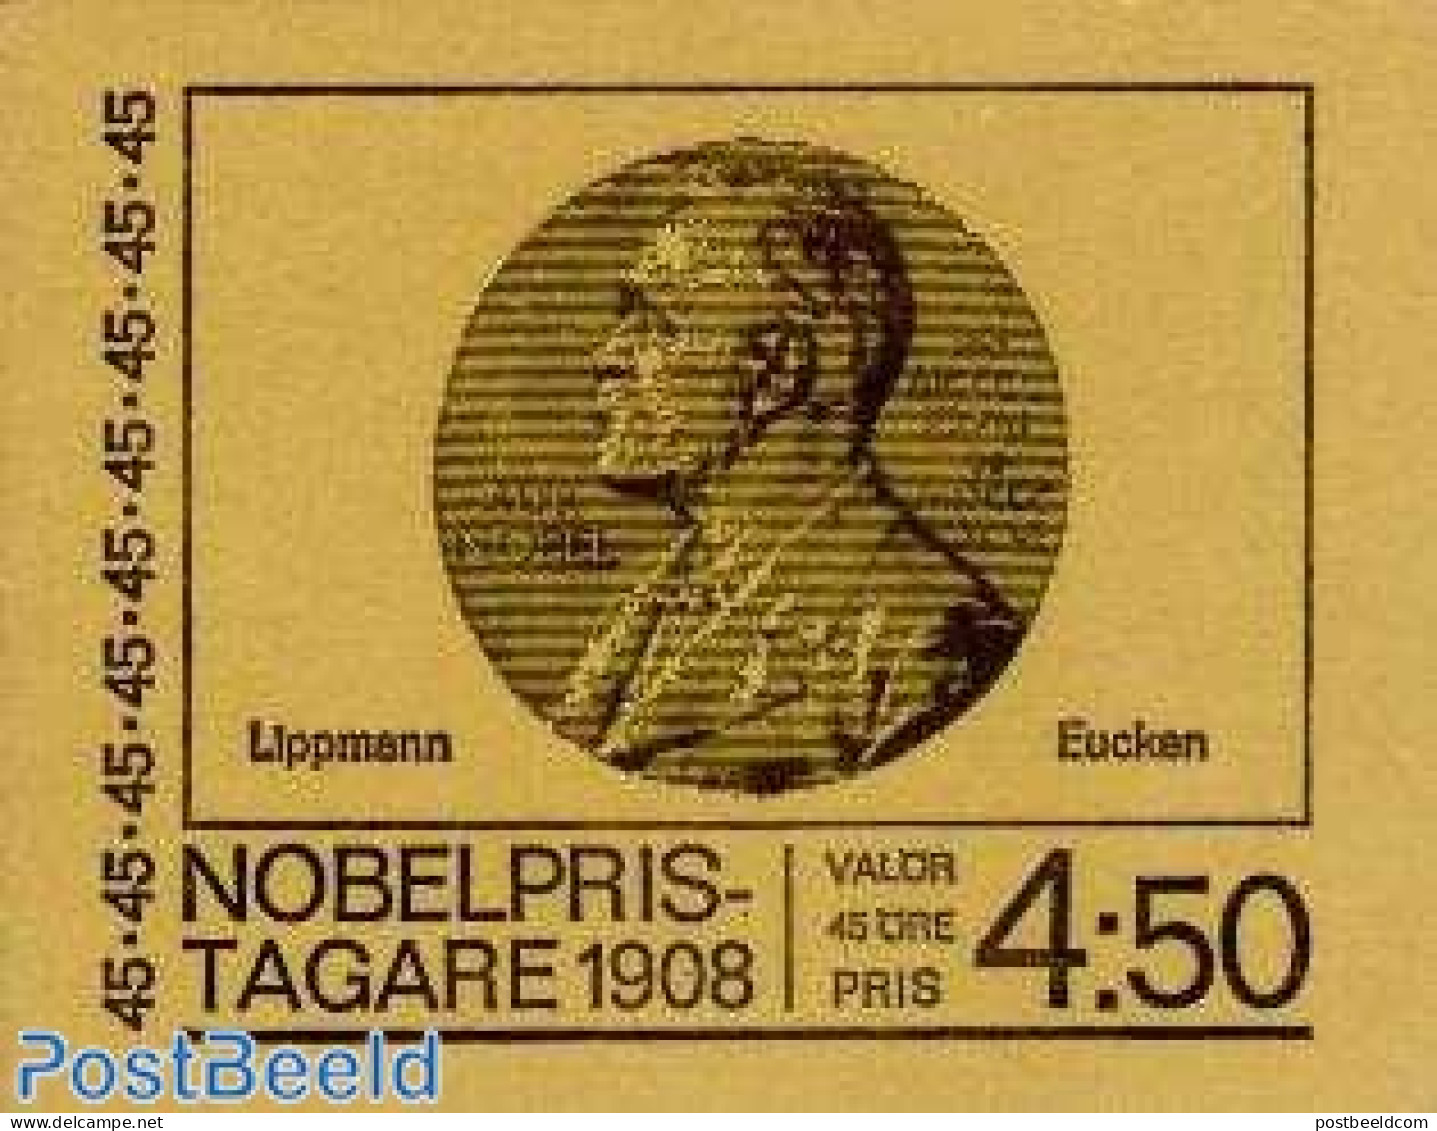 Sweden 1968 Nobel Prize Winners Booklet, Mint NH, History - Science - Nobel Prize Winners - Physicians - Stamp Booklets - Neufs